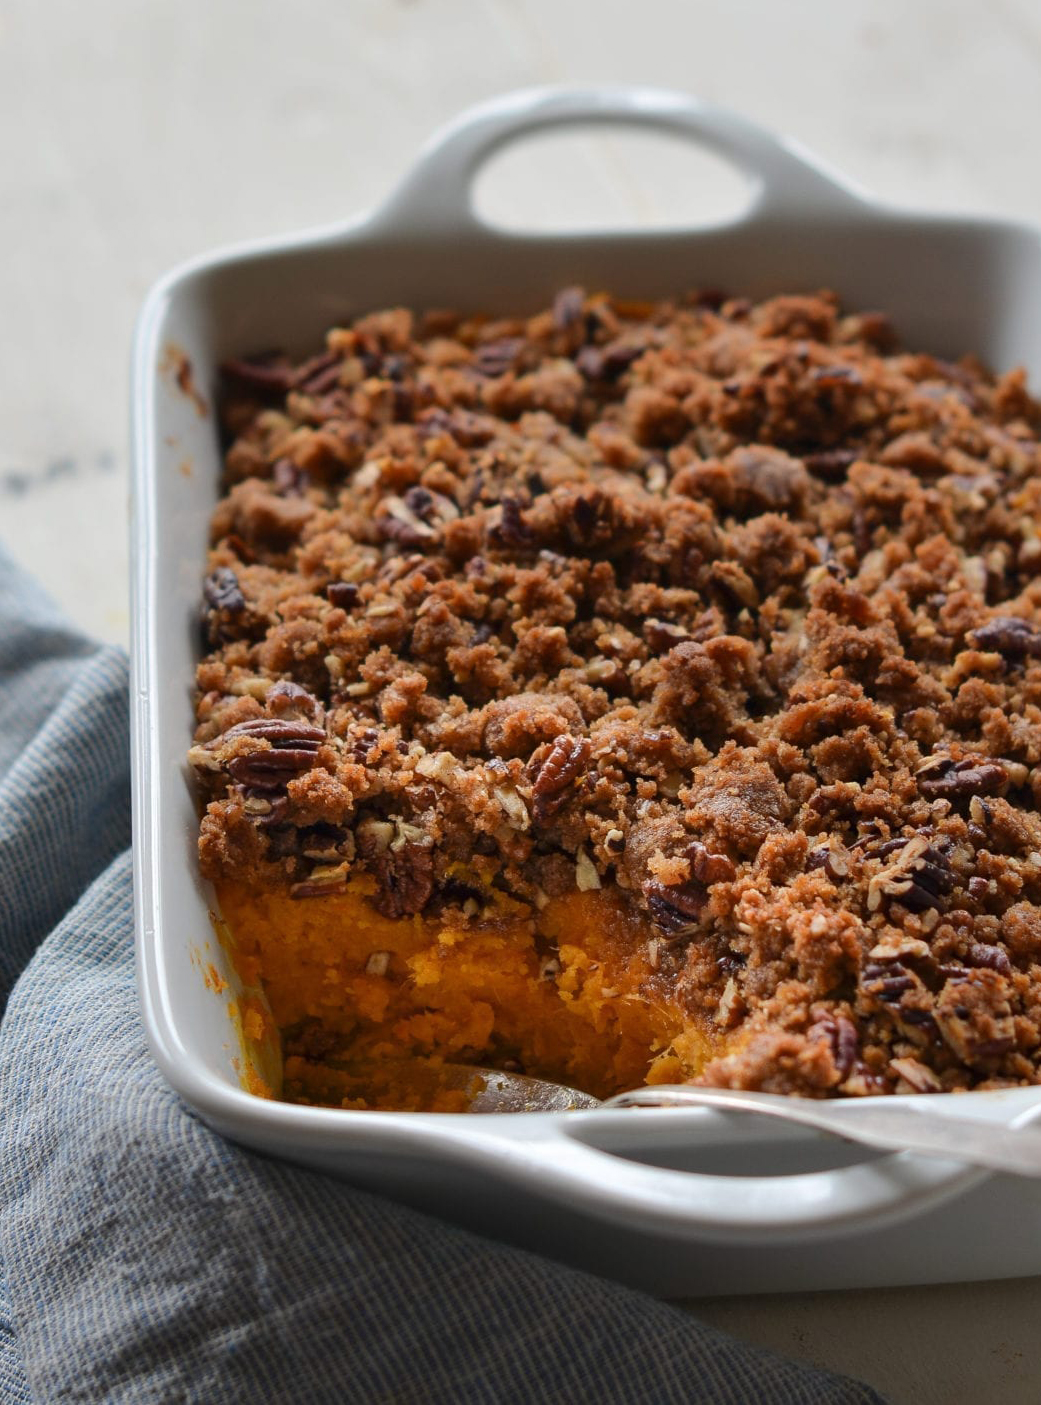 Best 8 Sweet Potato Casserole With Pecan Streusel Topping Recipes